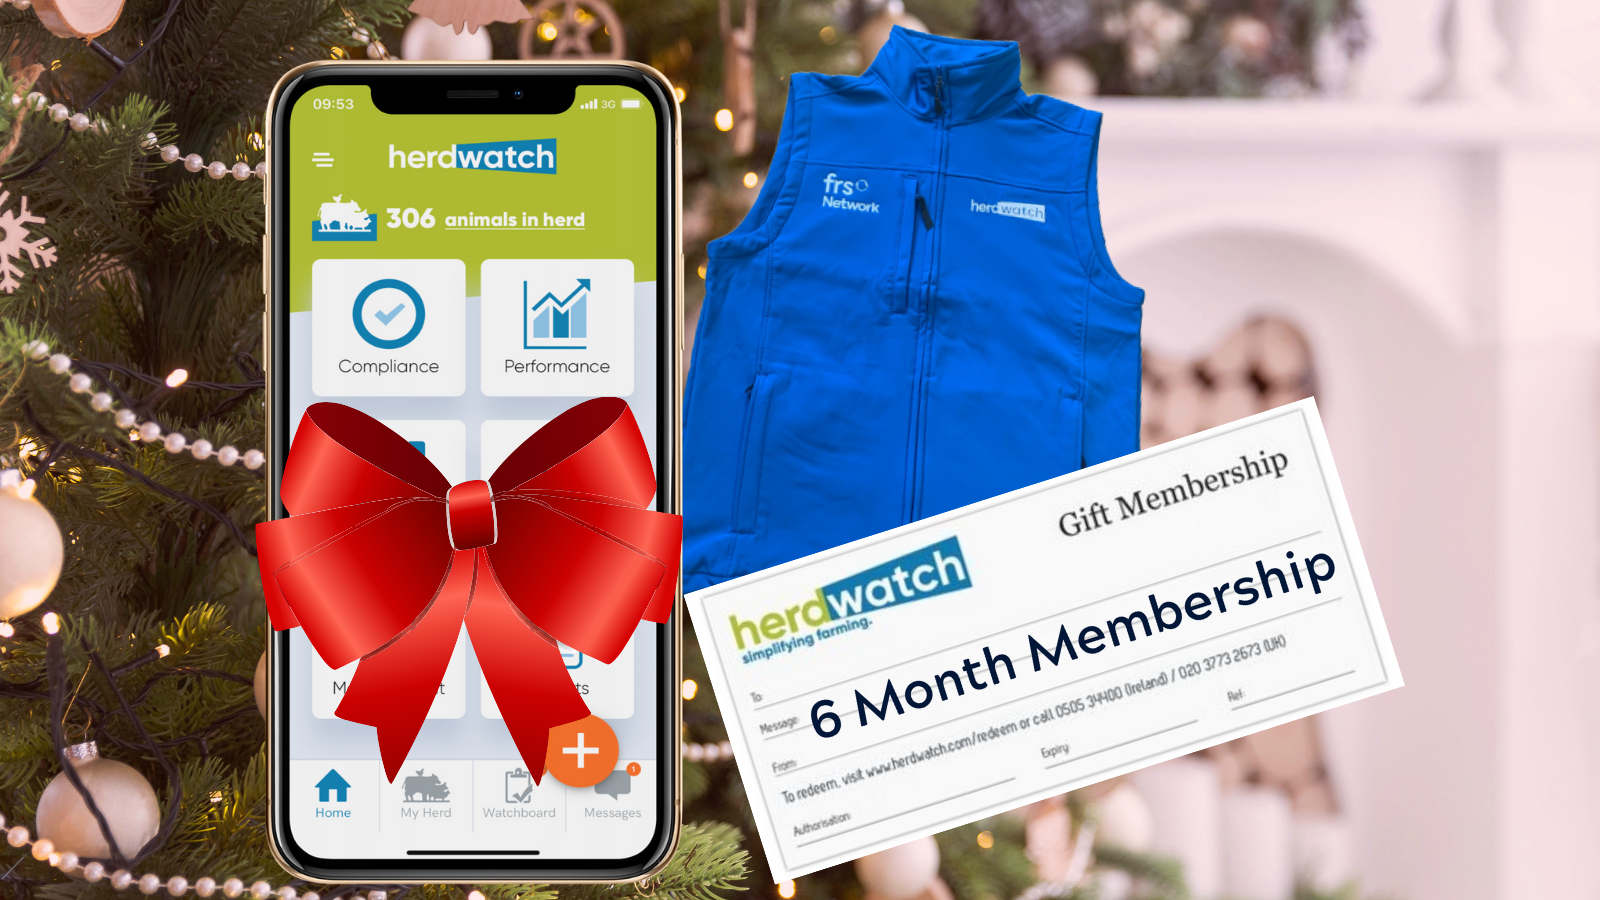 6 months plus herdwatch jacket offer